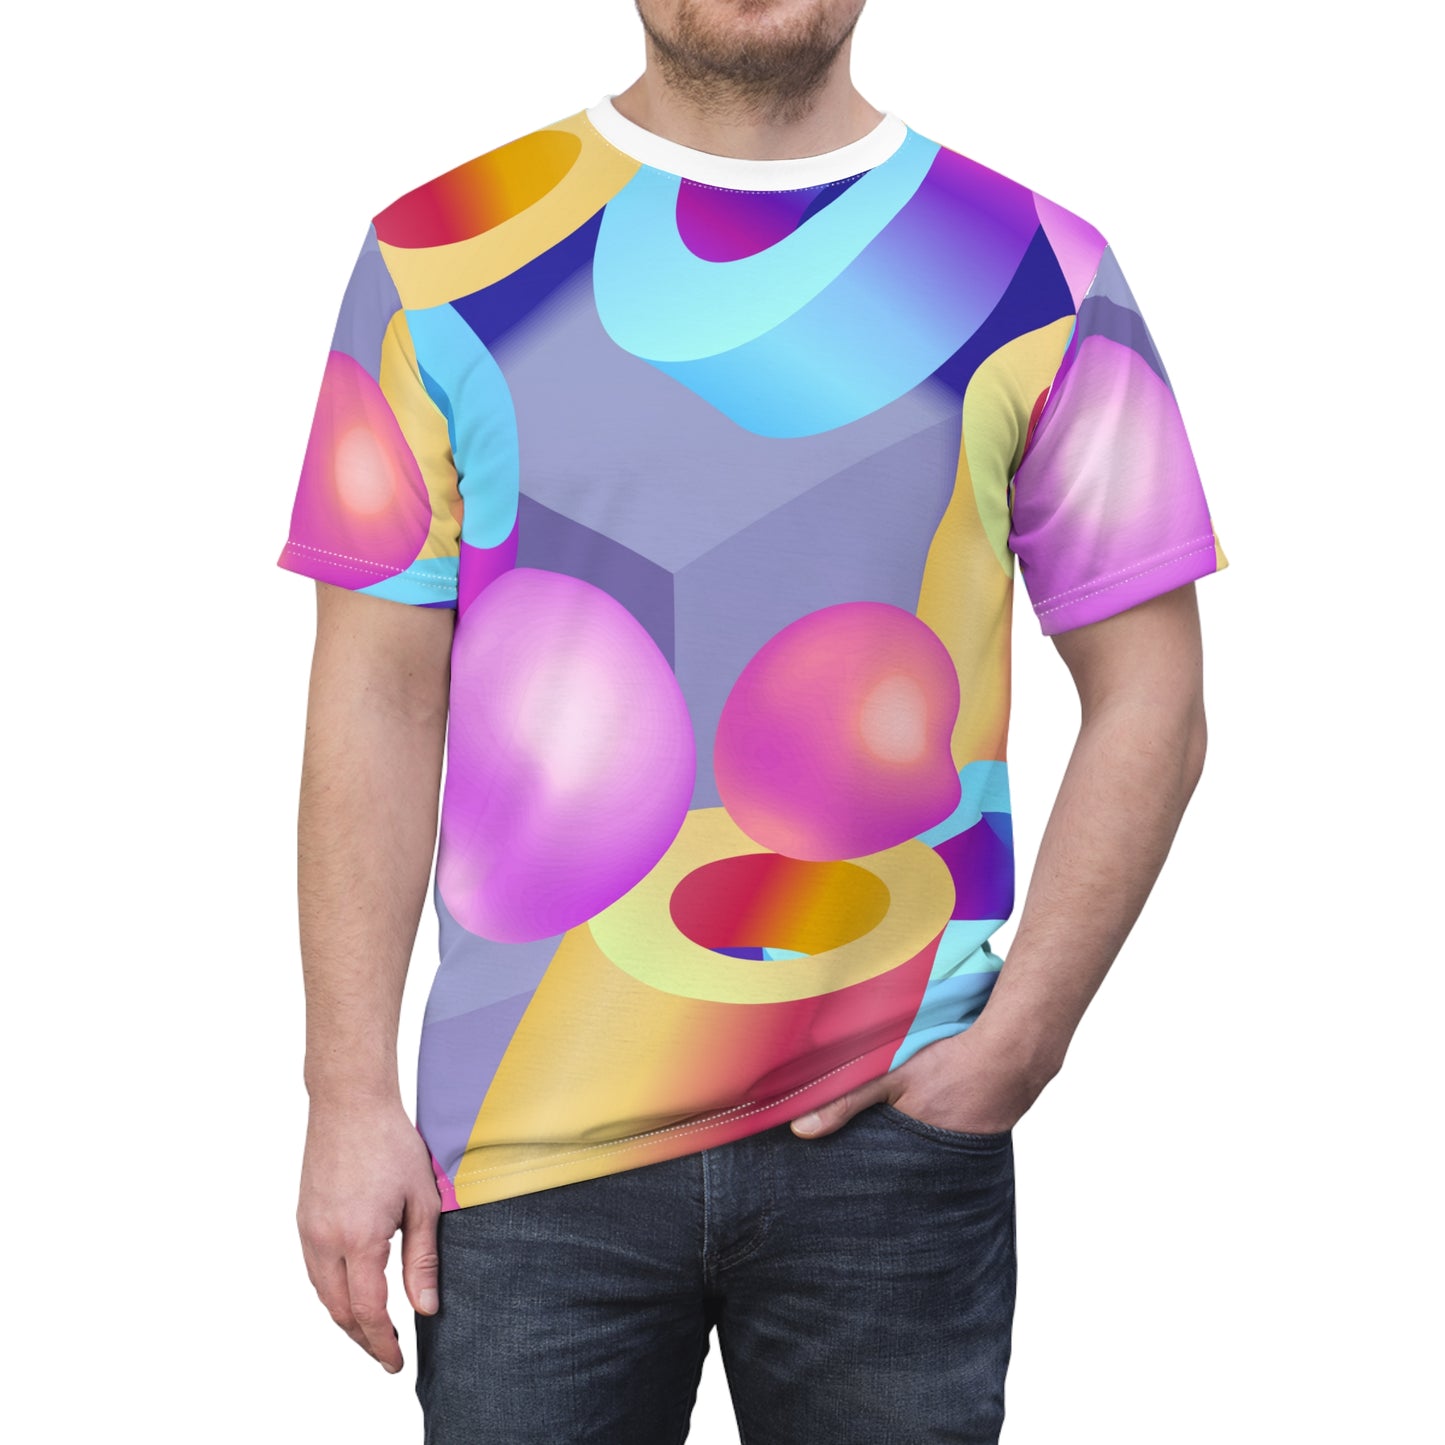 Abstract Design, Live Colors, Abstract Style, Unisex Cut & Sew Tee